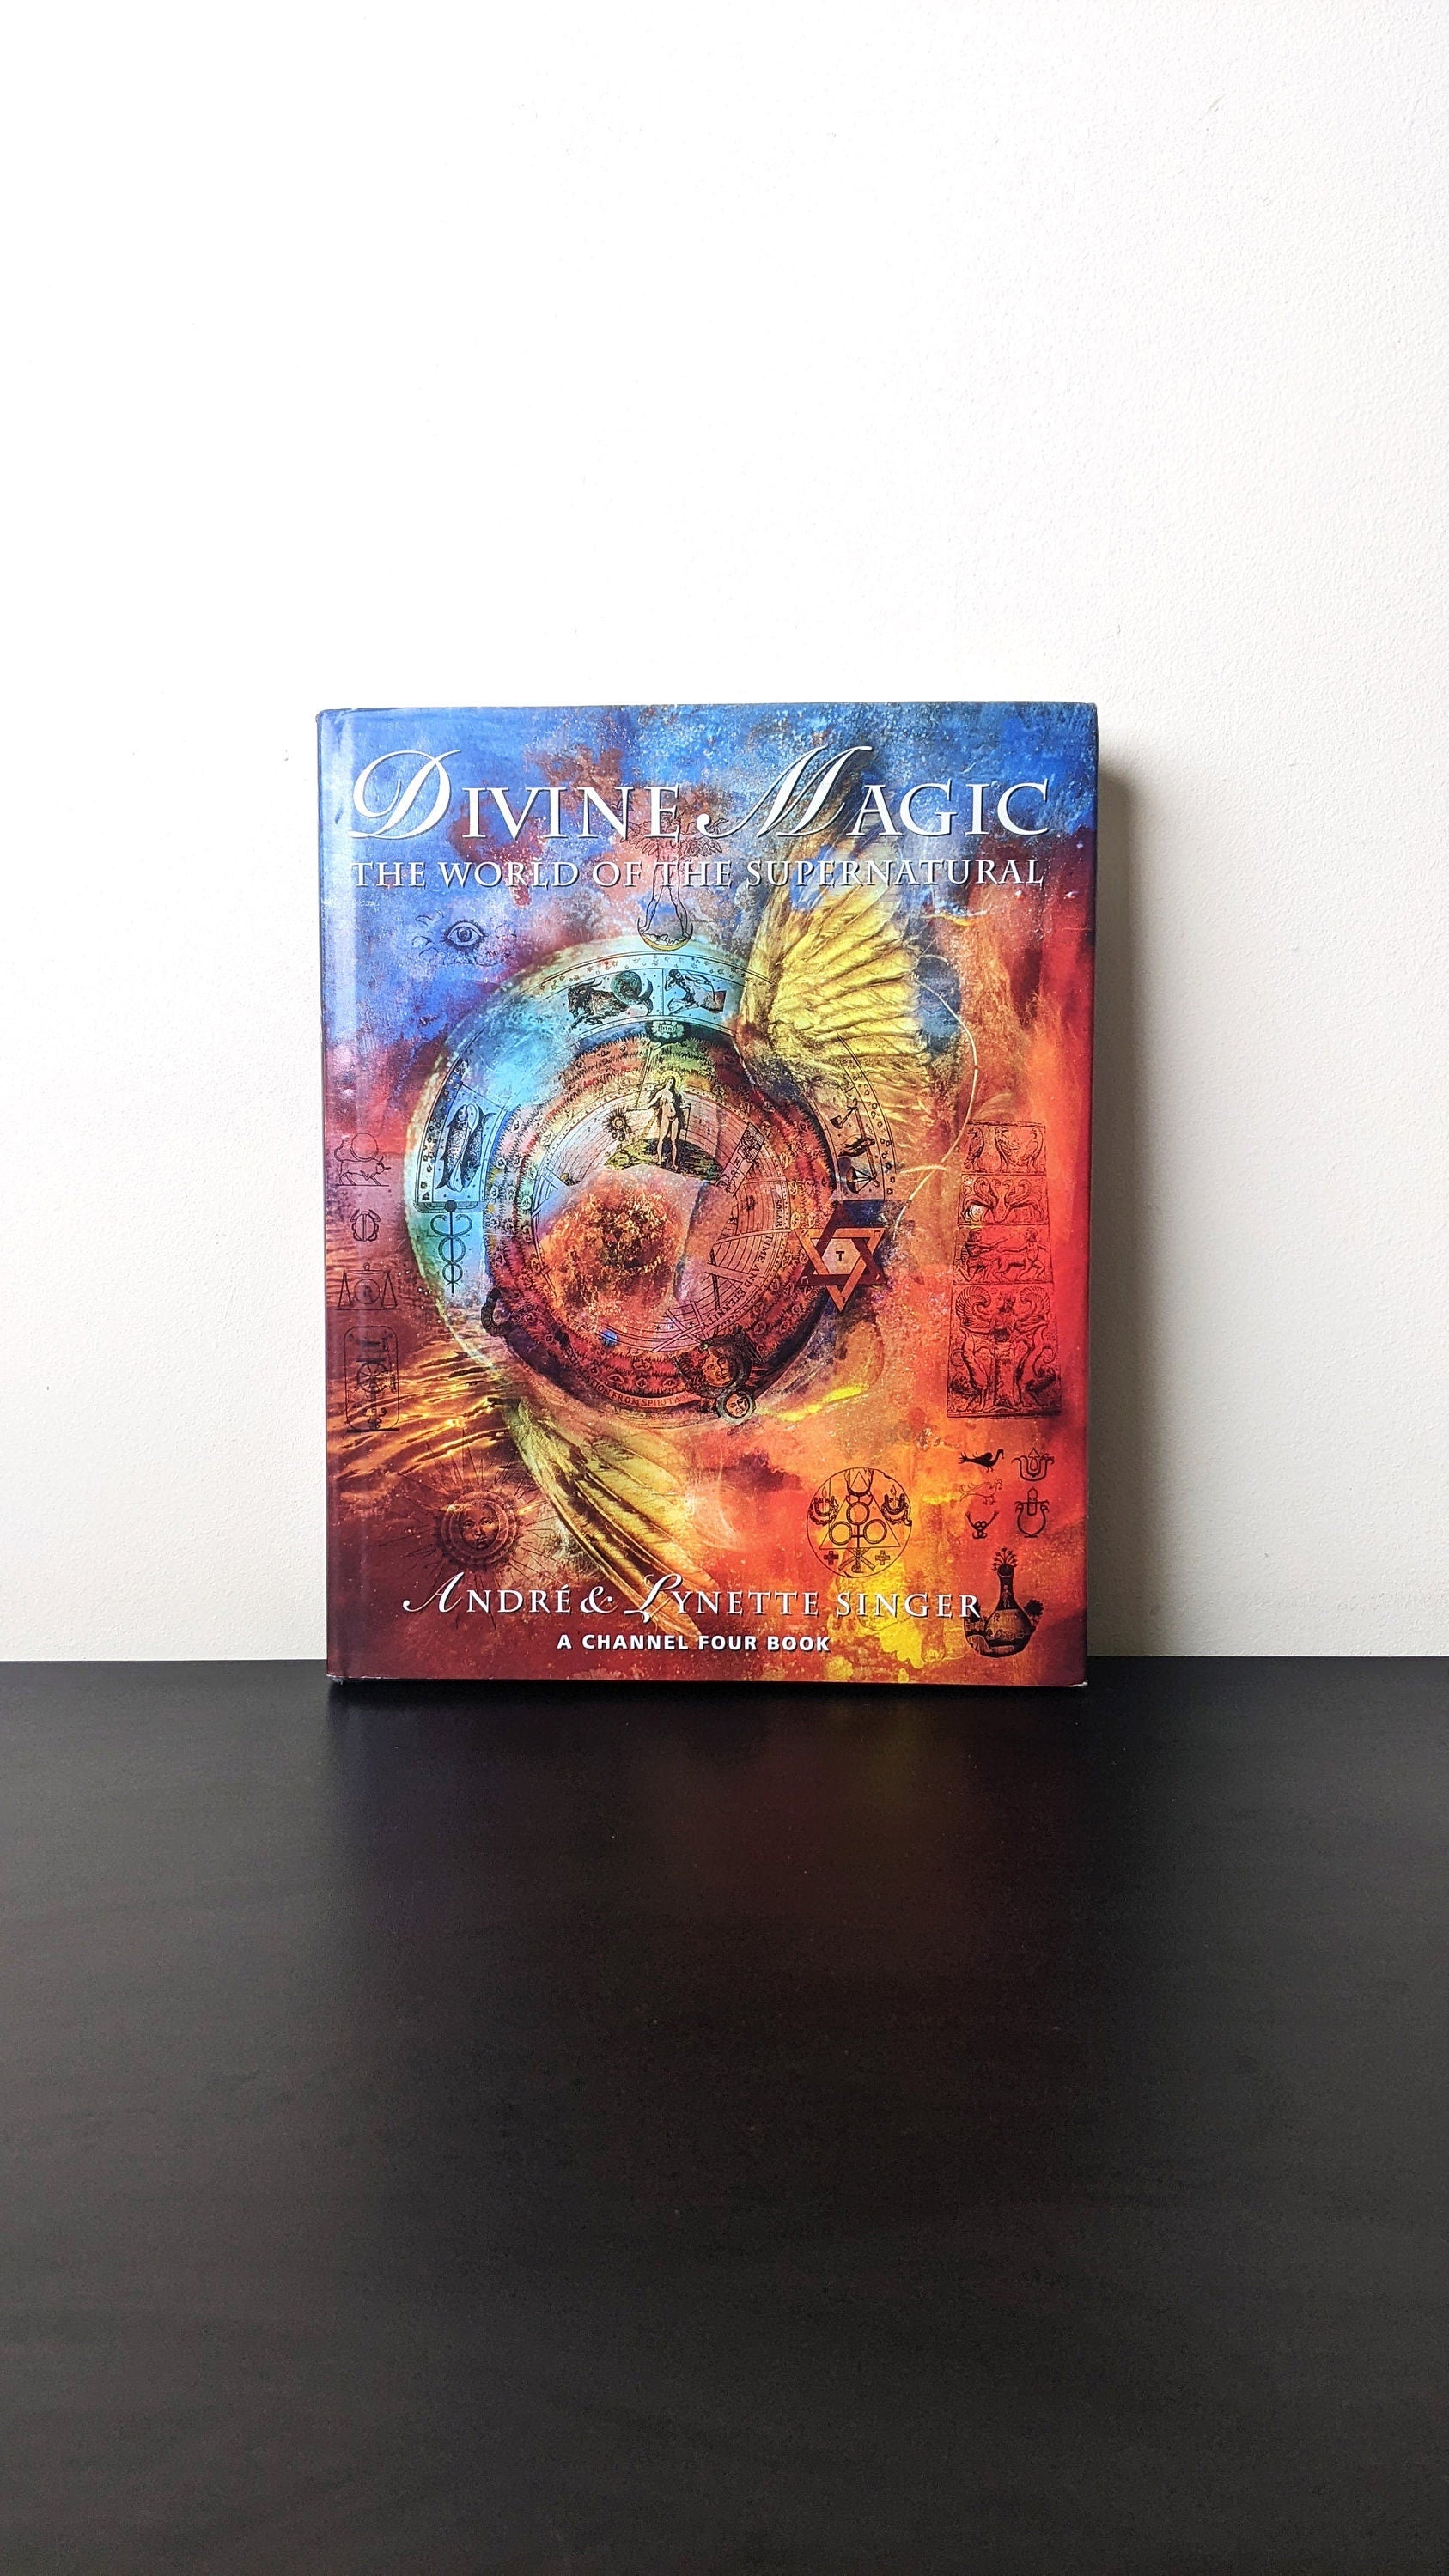 Divine Magic: The World of the Supernatural, 1995 1st UK Hardback Edition by BCA Boxtree.